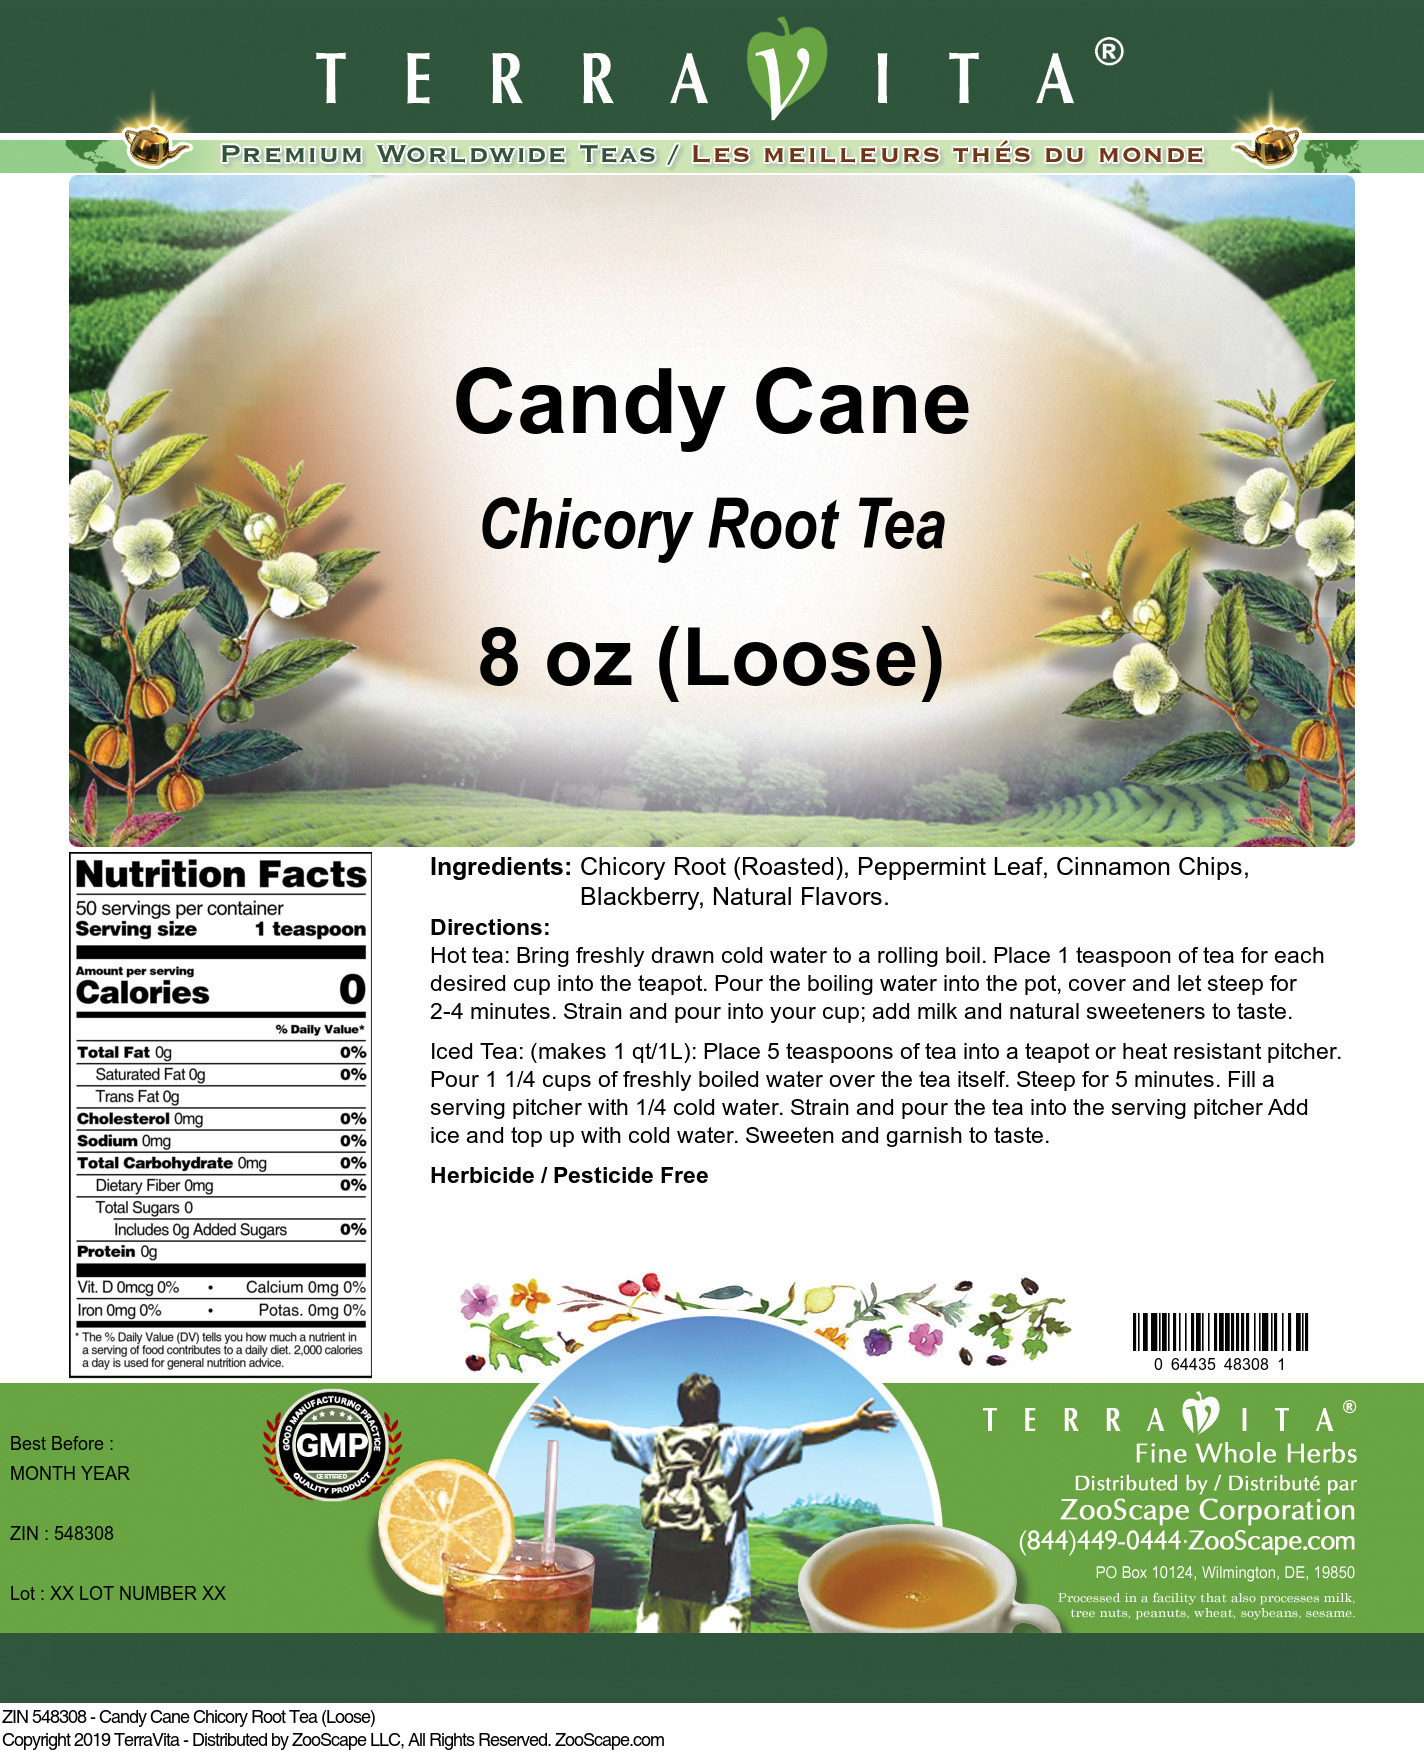 Candy Cane Chicory Root Tea (Loose) - Label